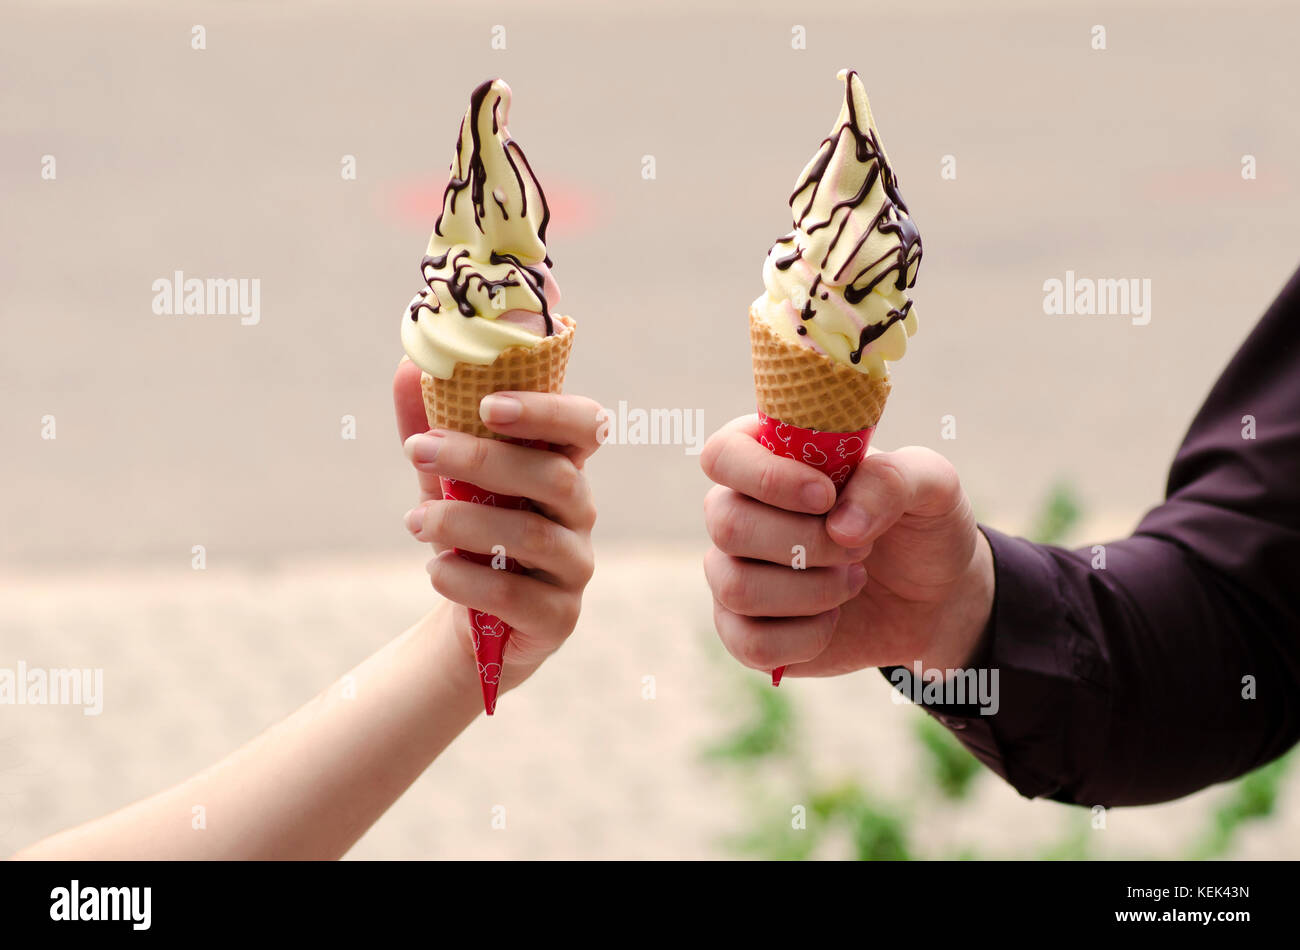 Close-up view of the hands of a boy and a girl holding two ice-cream with chocolate toping in a wafer with a blurred background Stock Photo